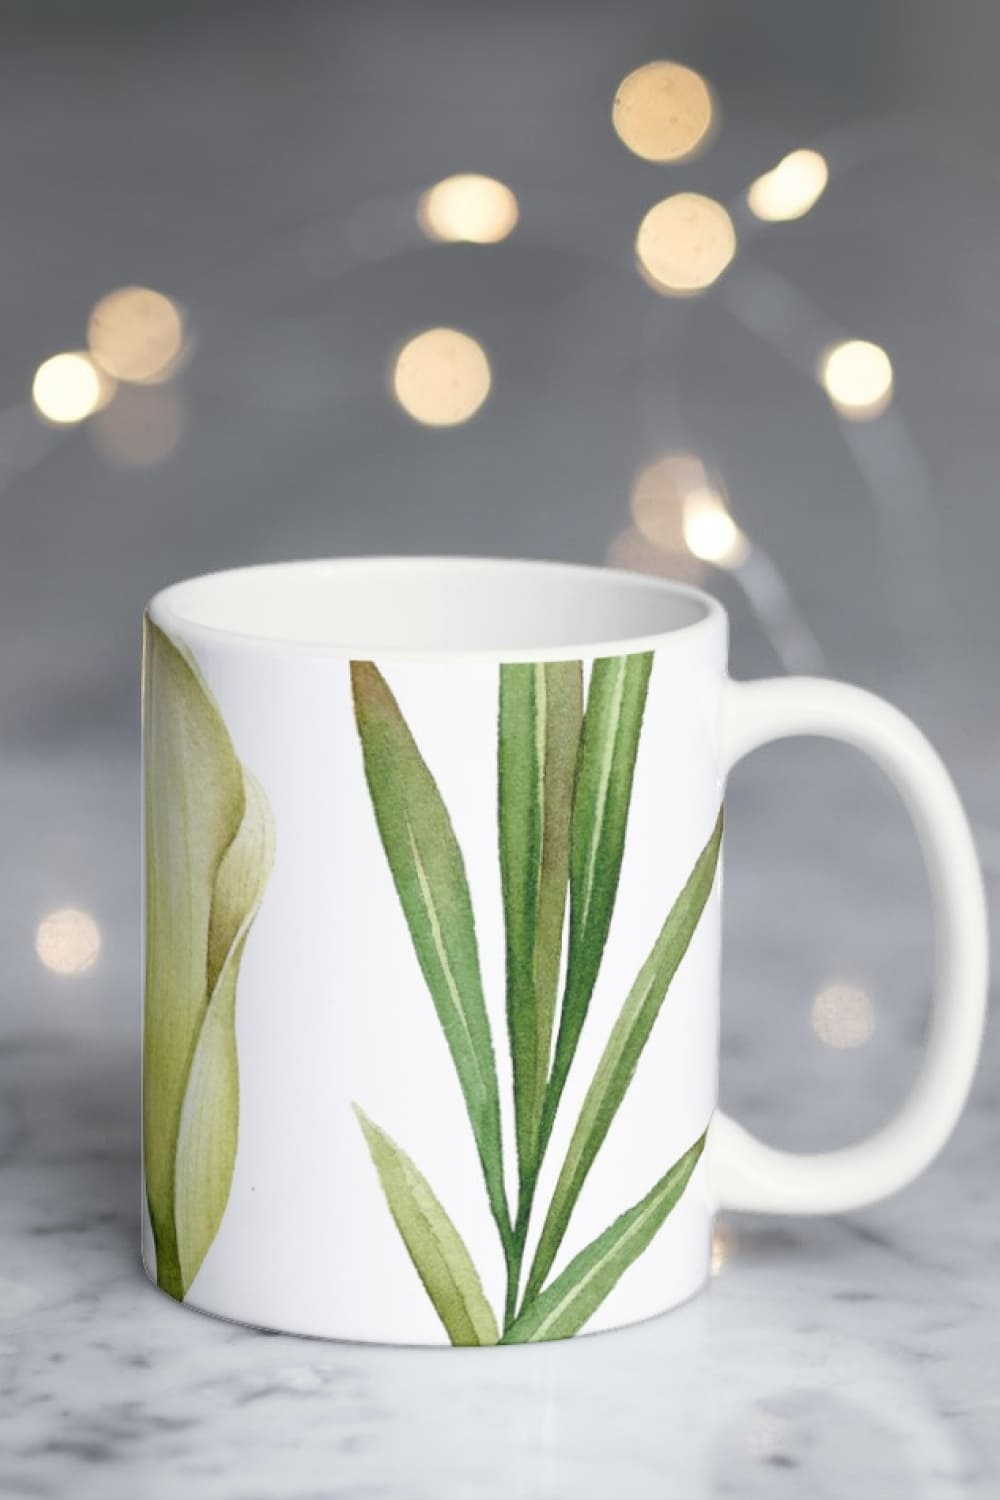 Cute calla lily elements for a cup.